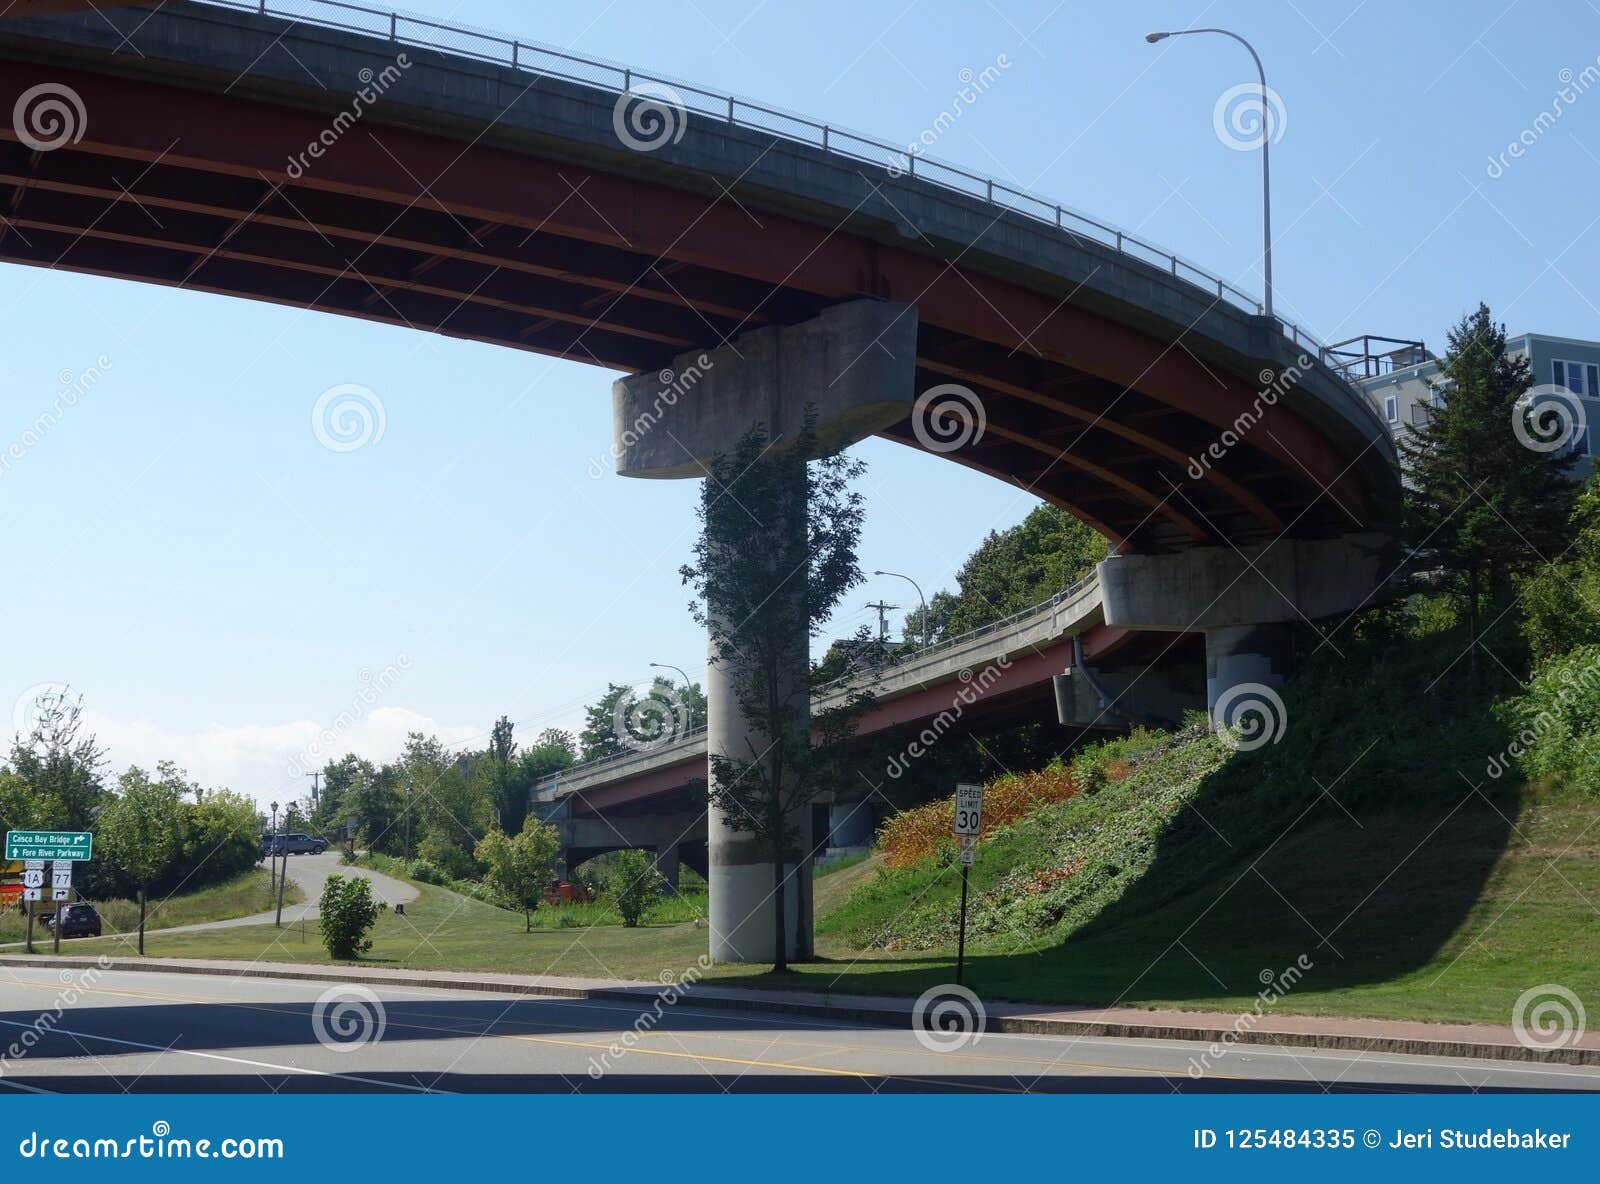 Curved Highway Overpass Inclined View From Underneath Stock Image Image Of Inclined Loop